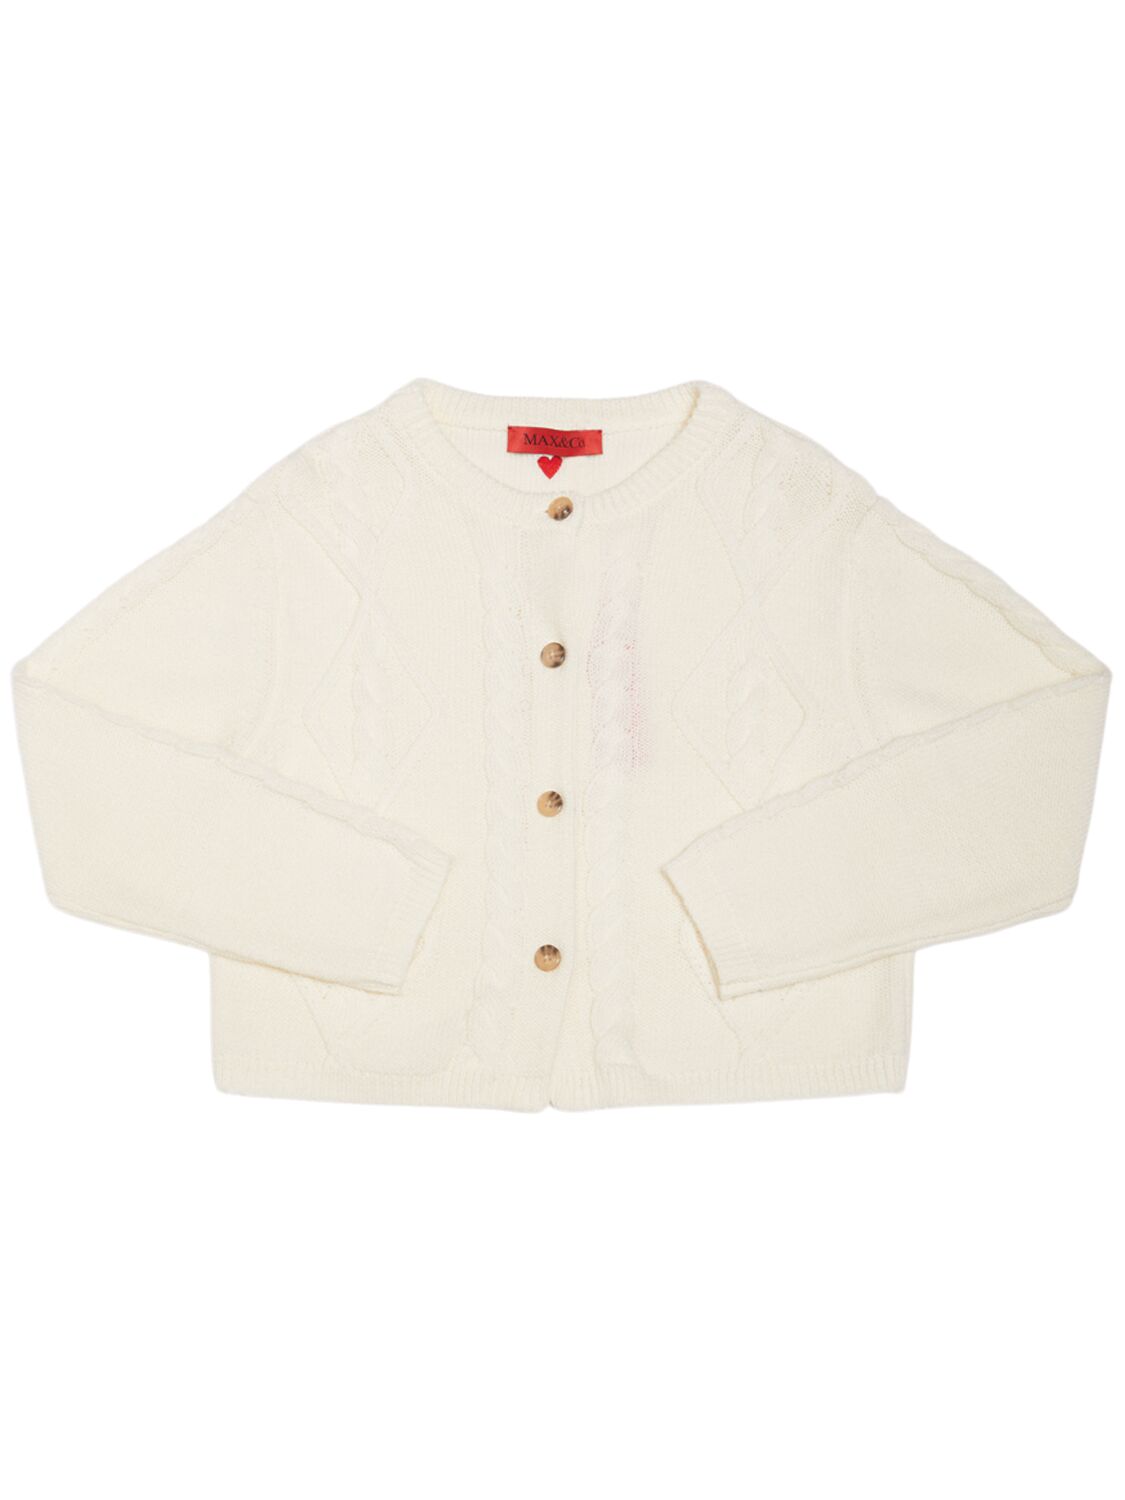 Max & Co Kids' Wool Blend Knit Cardigan In White